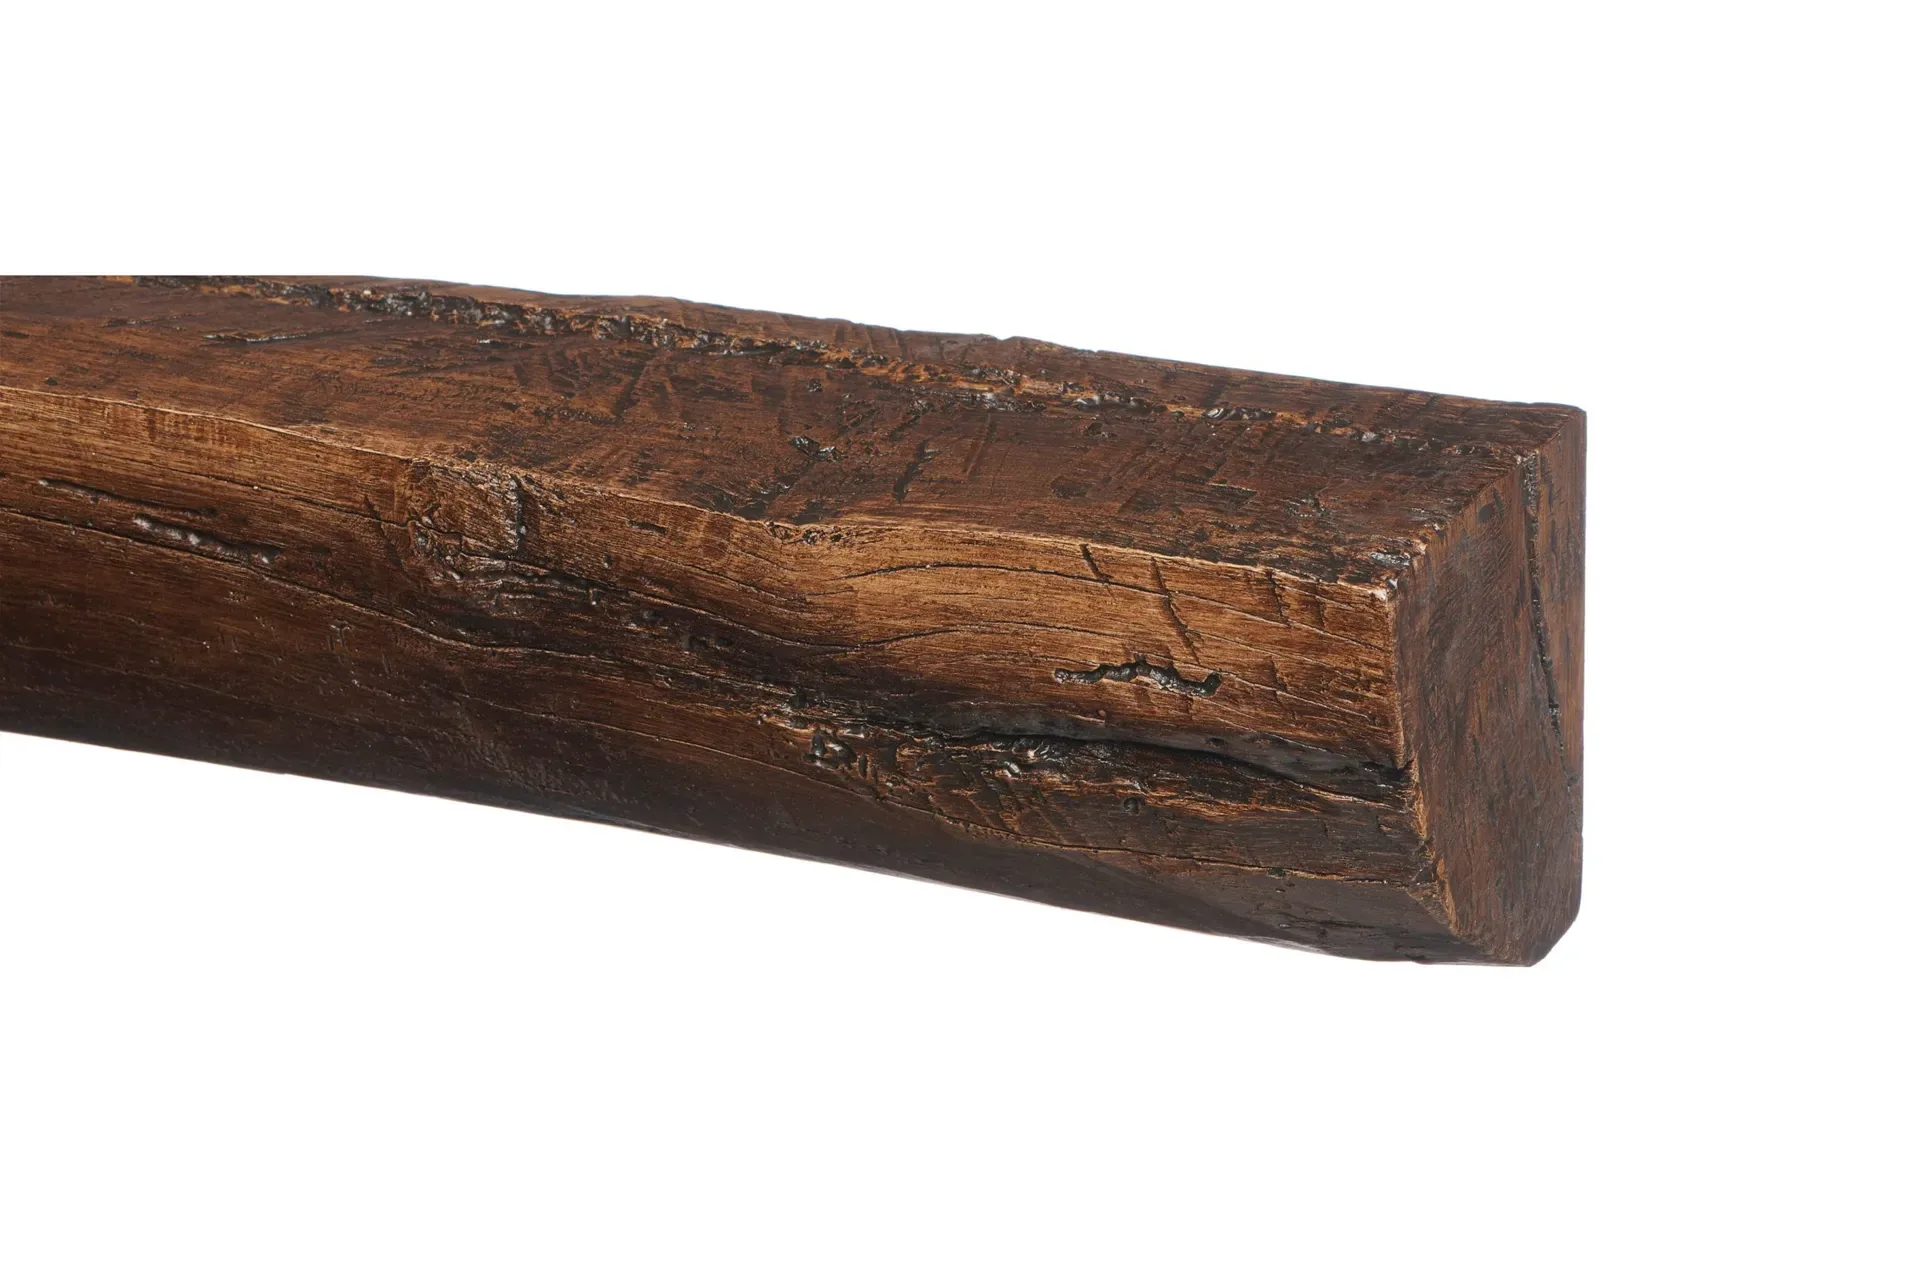 The gallery collection fireplace beam rustic dark oak